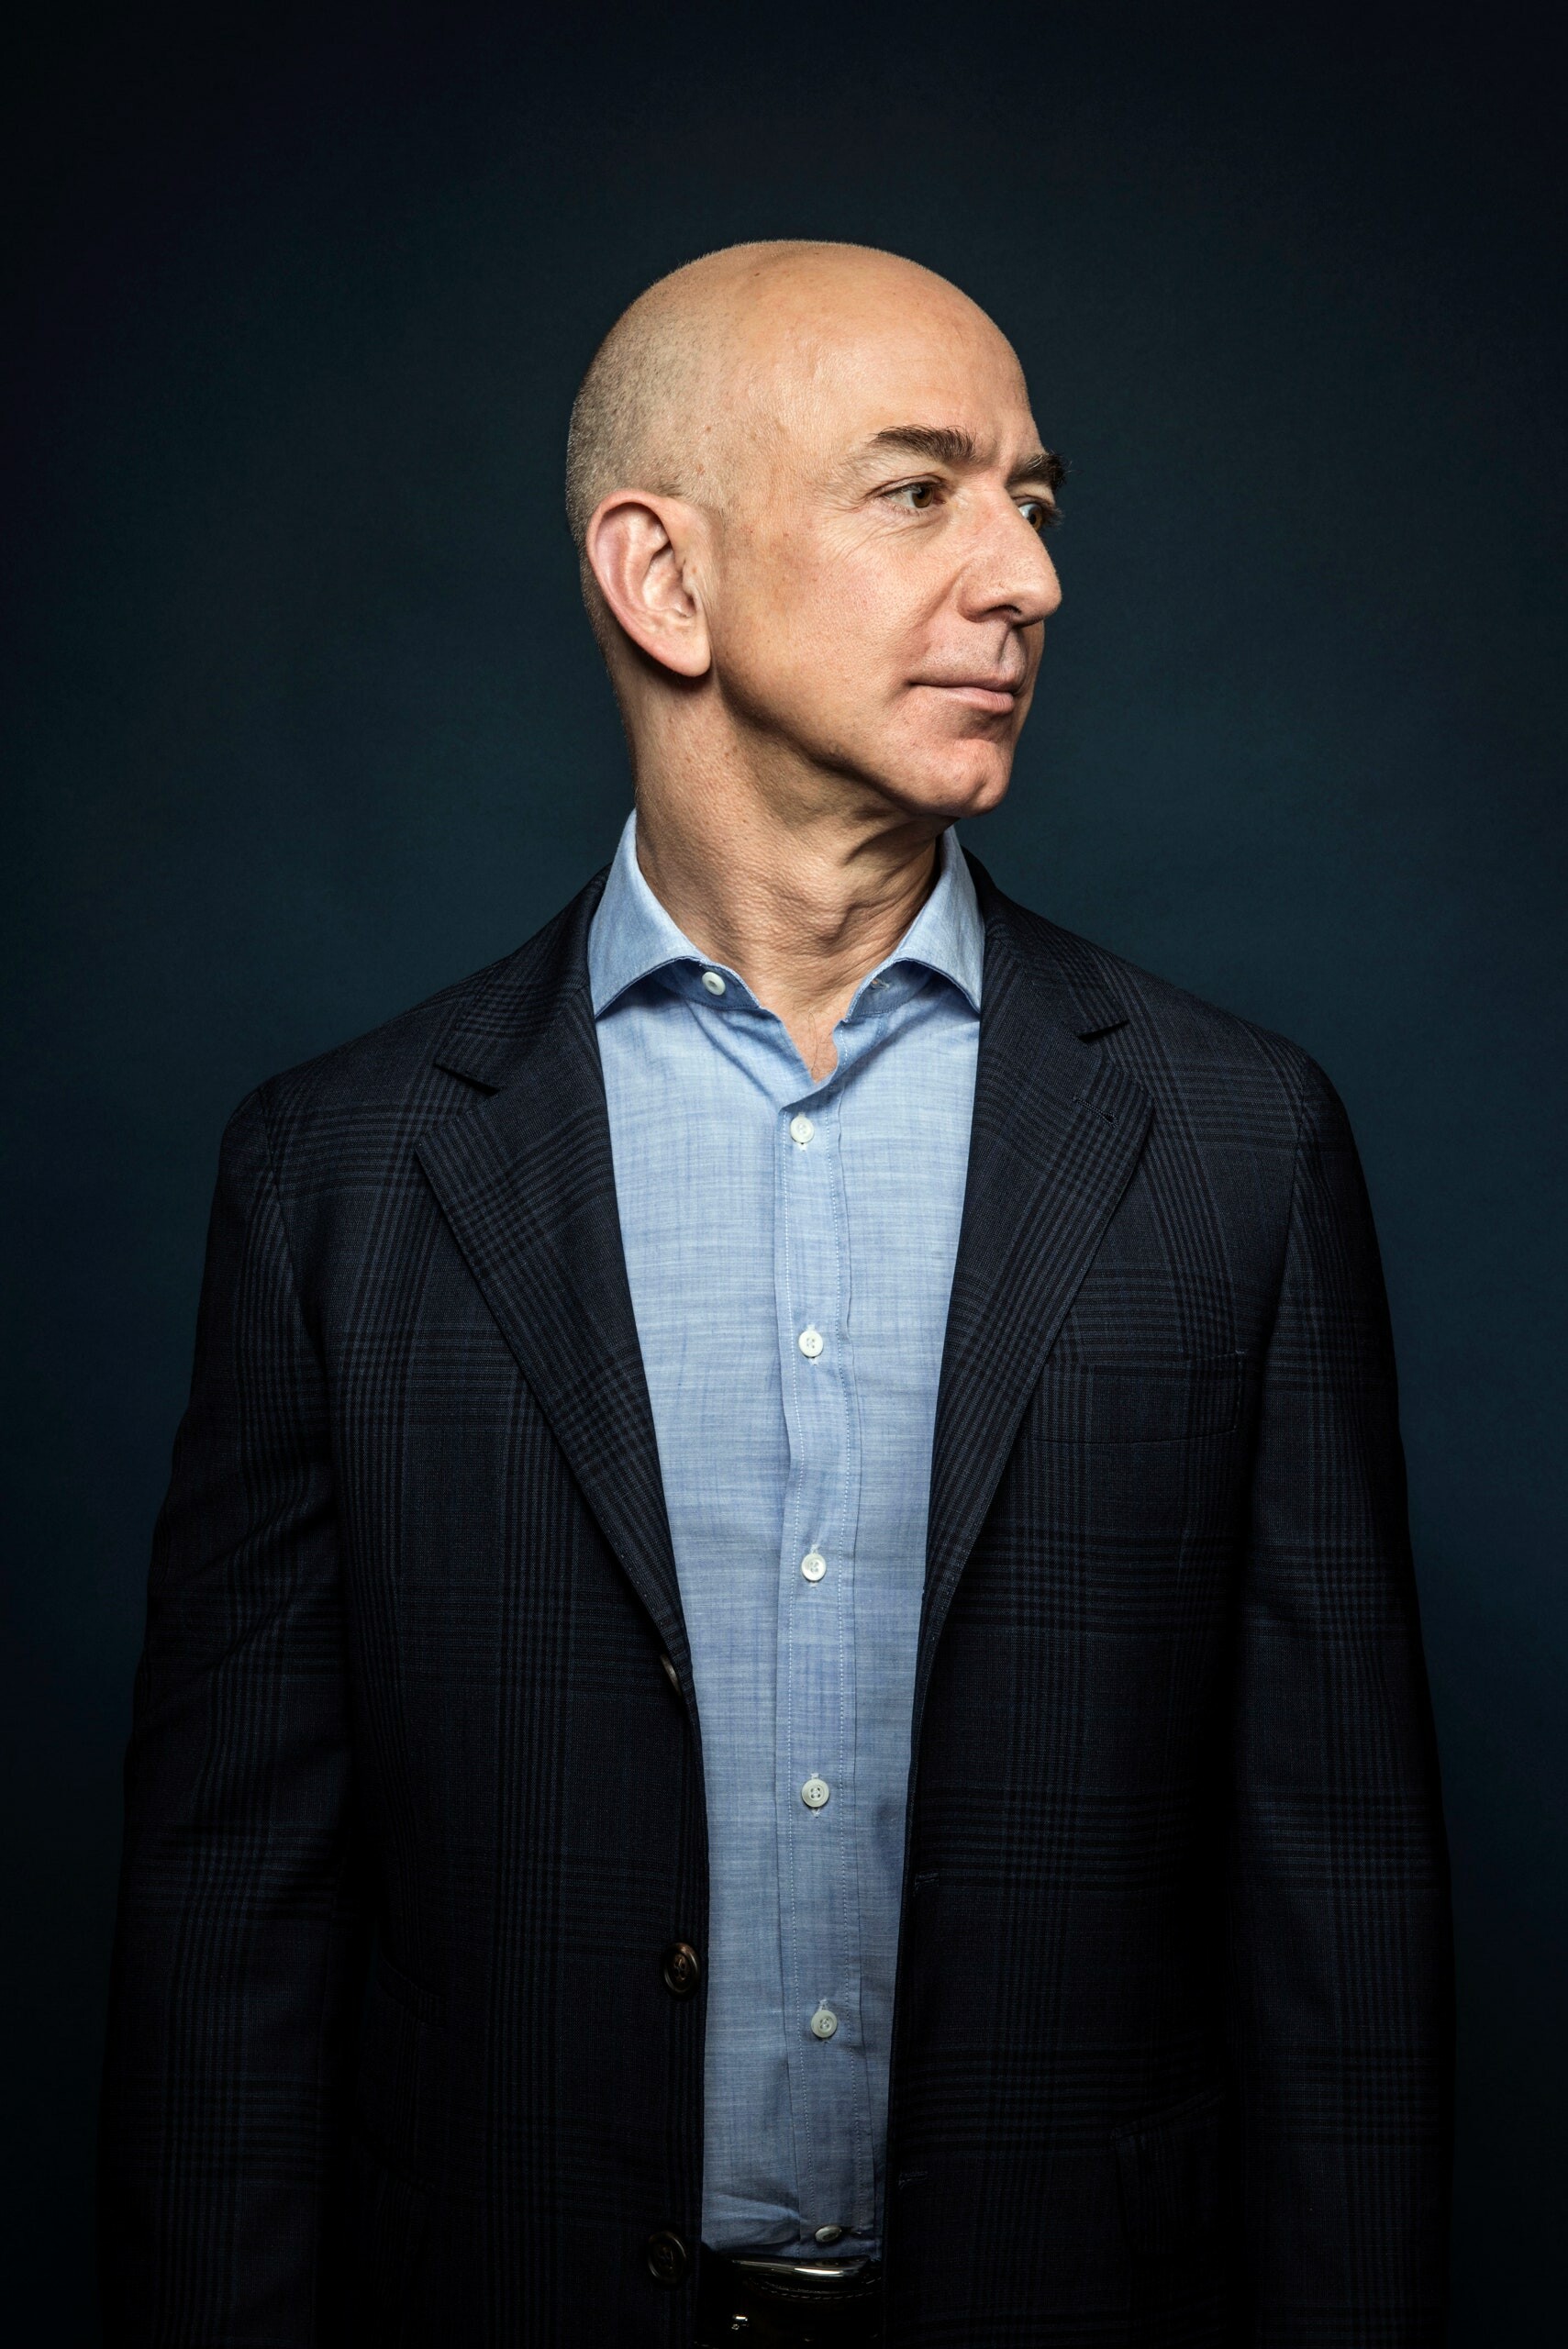 Jeff Bezos: The founder of aerospace company Blue Origin, Developes reusable rocket engines and launch vehicles designed to significantly lower the cost and increase the accessibility of space flights. 1710x2560 HD Background.